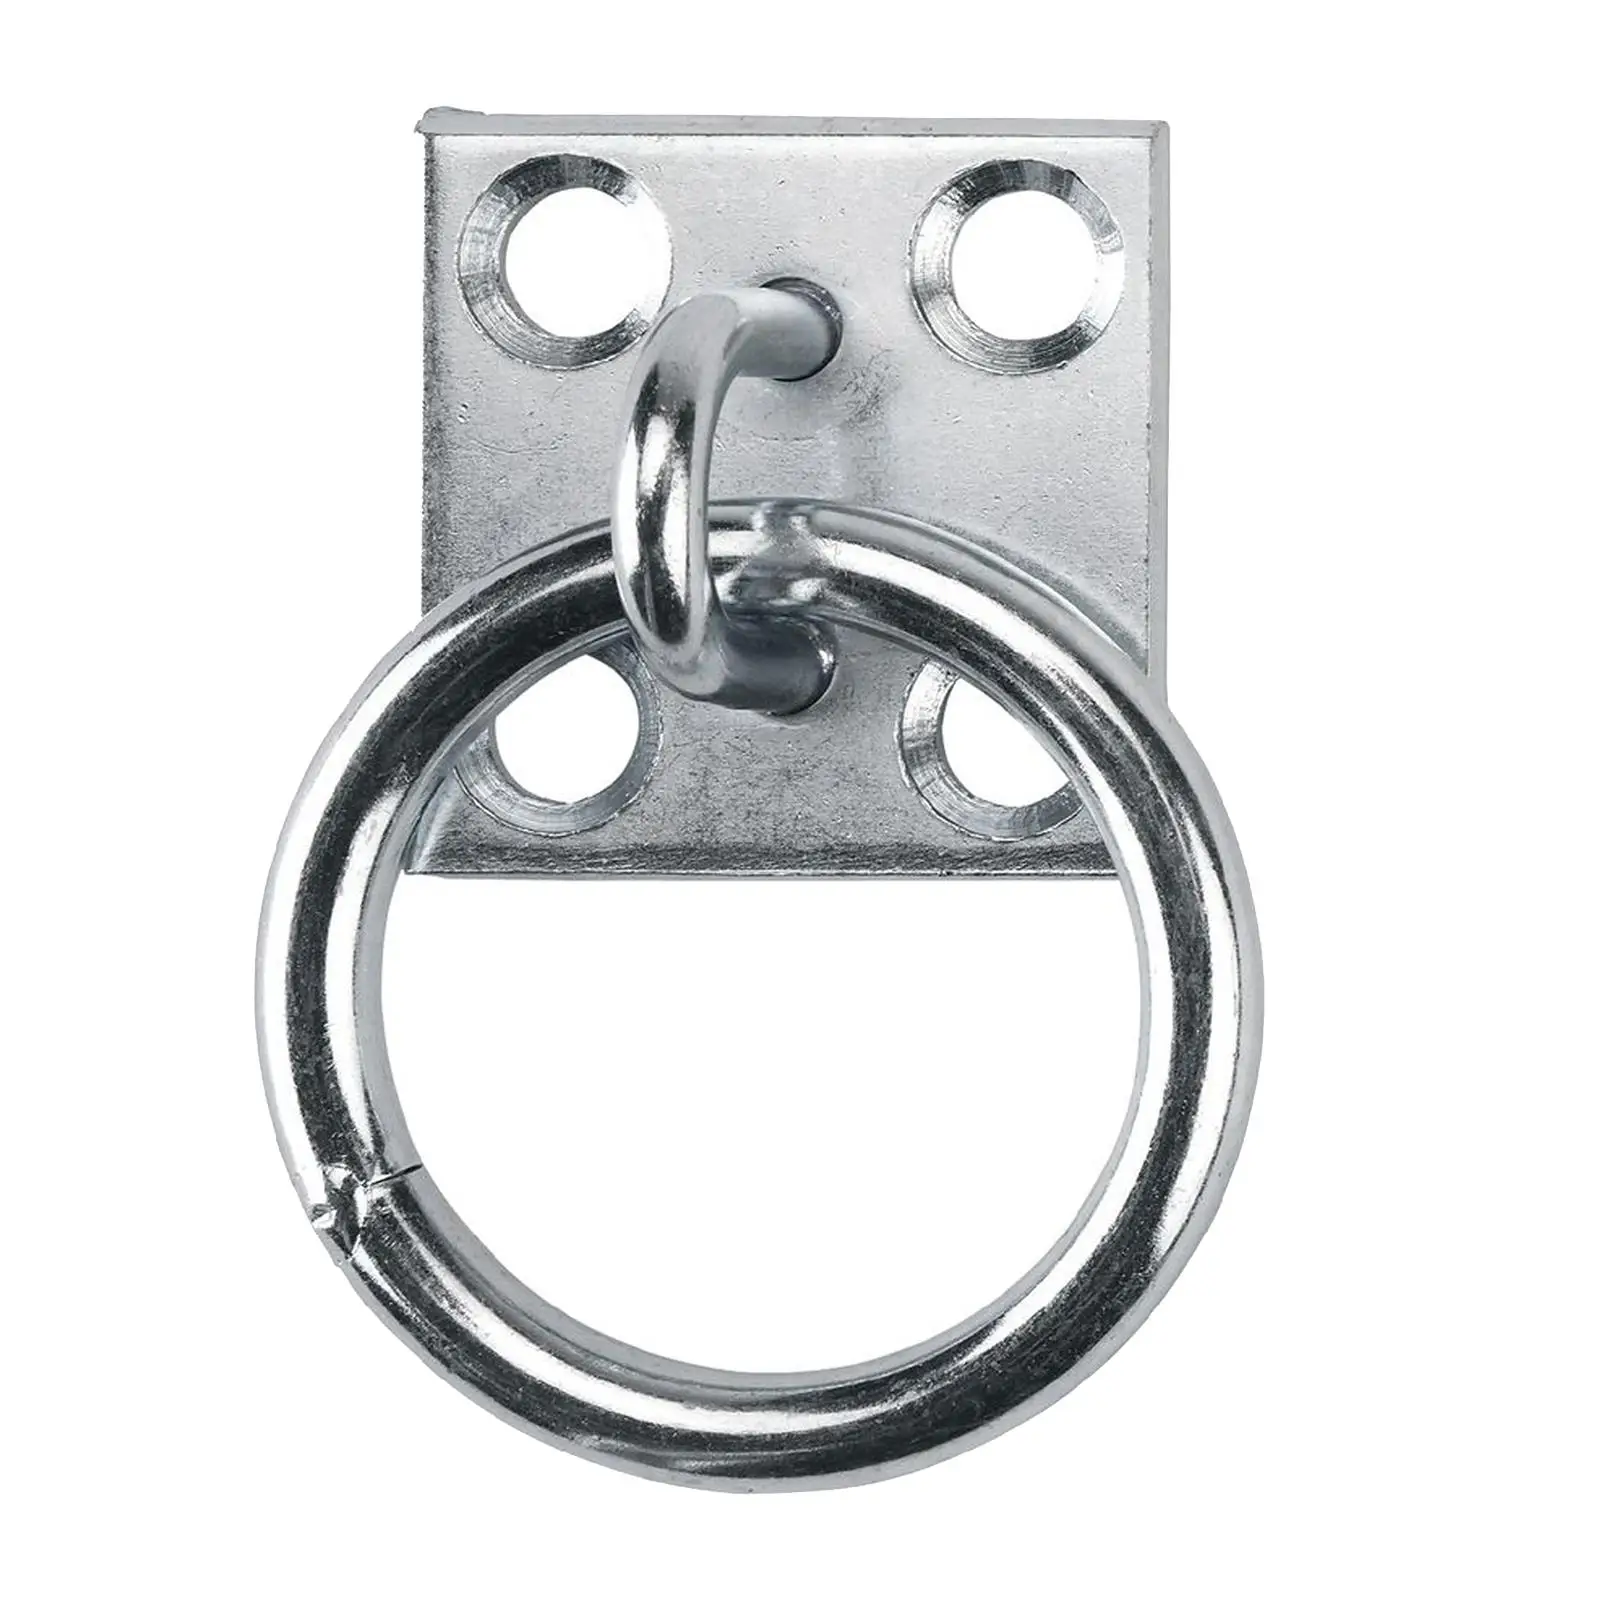 Ring Plate Horse Stable Tool Tying Horses Iron Nickel Plated Tie up Tether for Dog Lashing Equestrian Animal Accessories